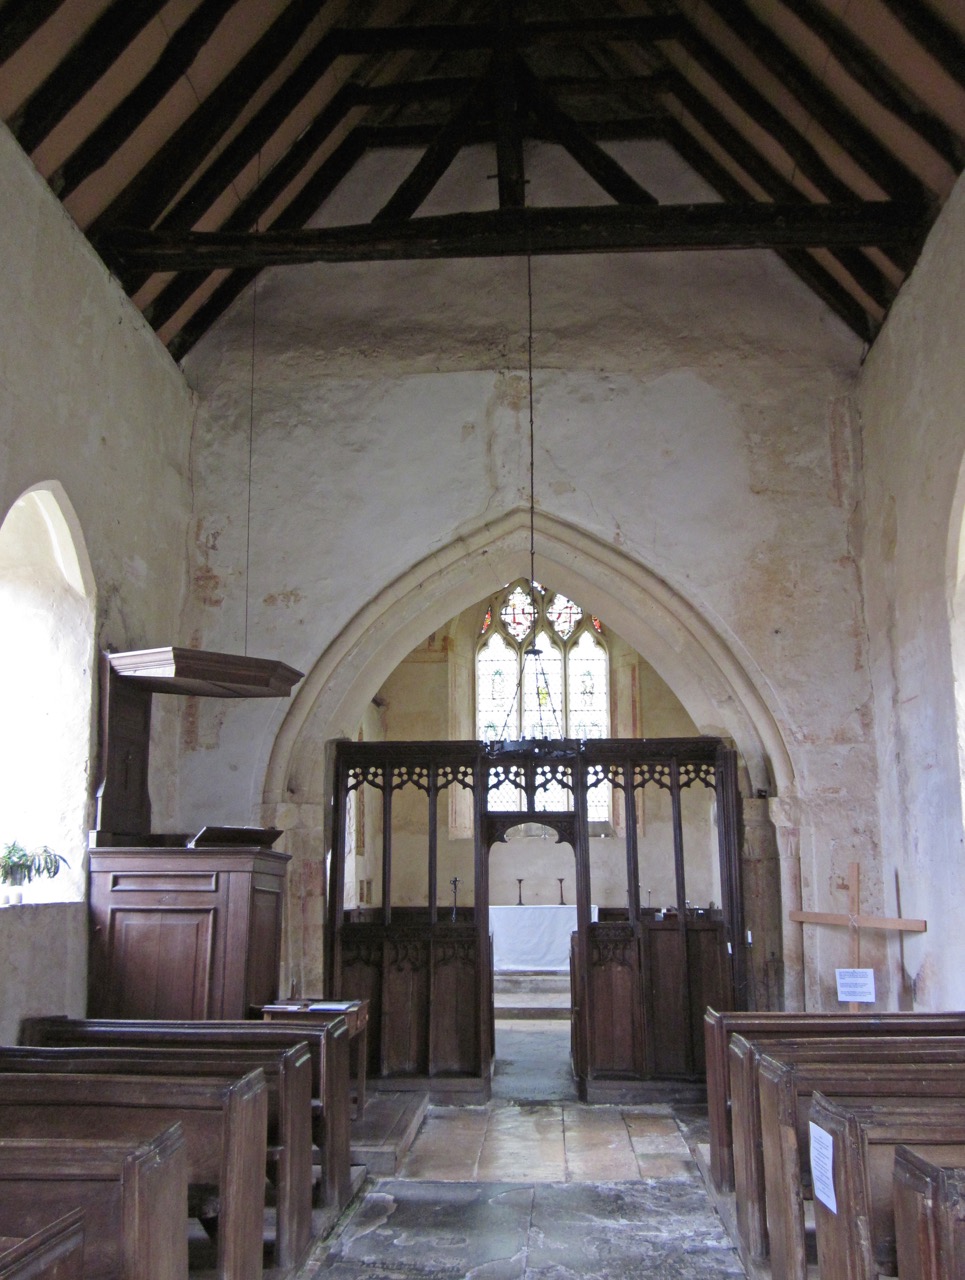 Hailes Chapel of Ease, interior view